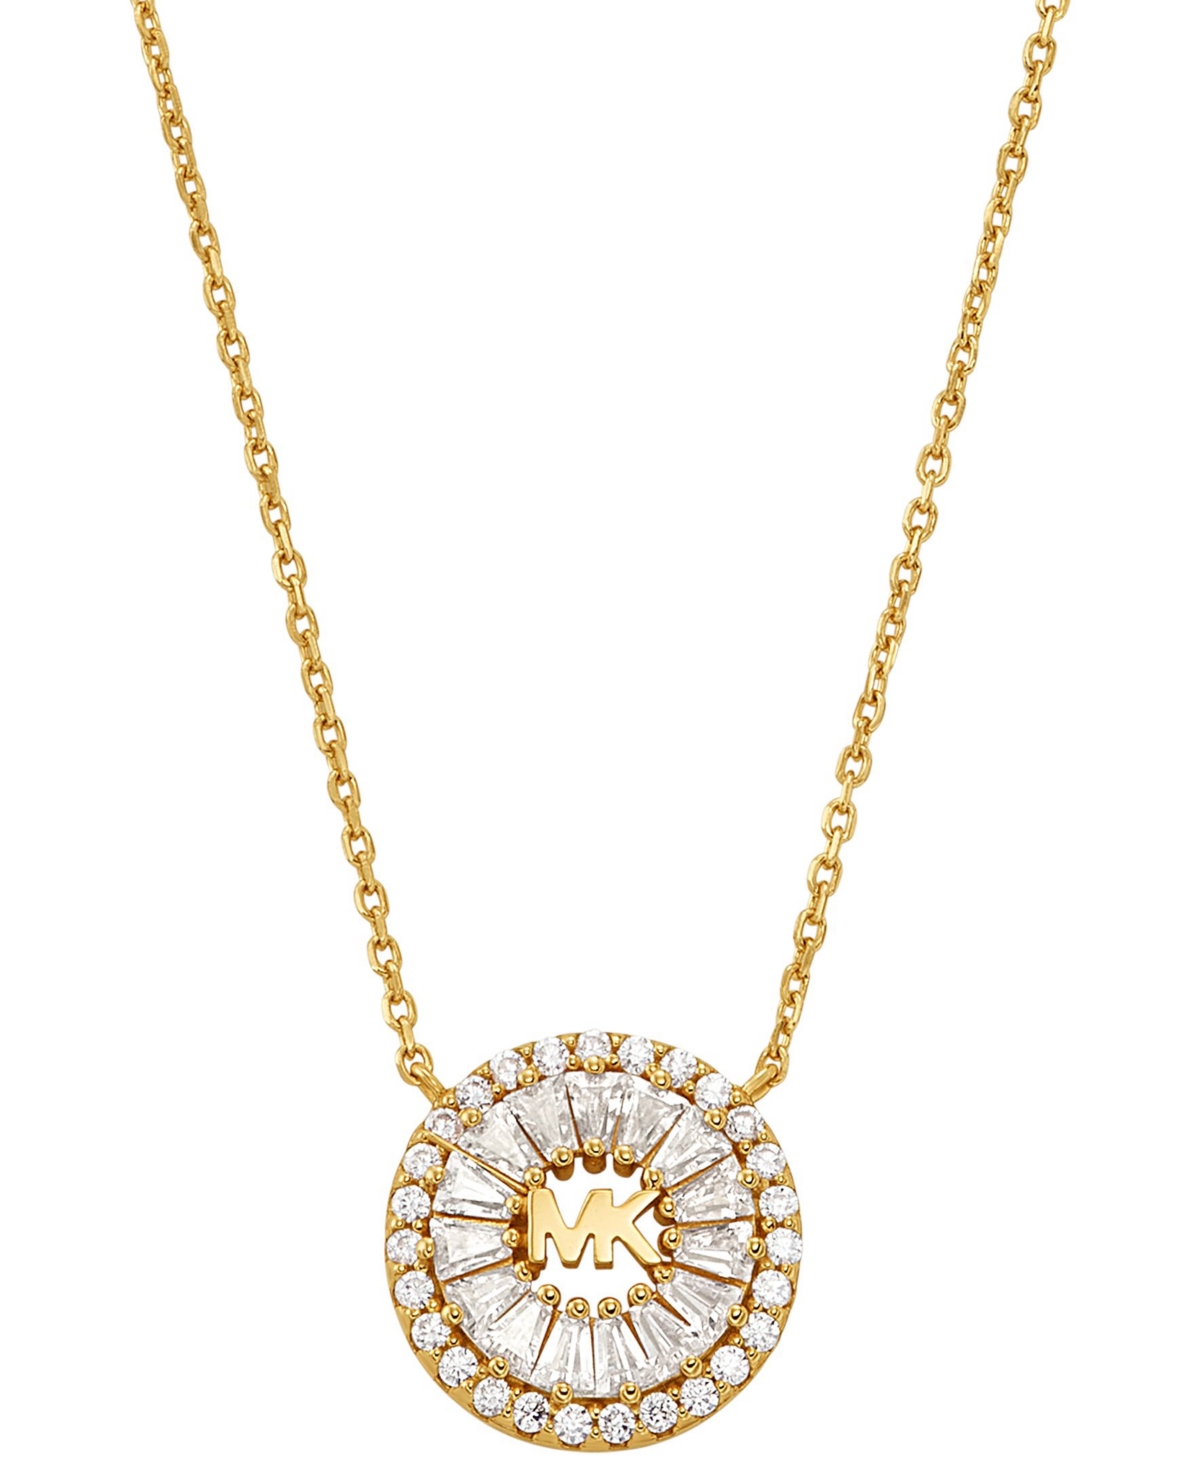 MICHAEL KORS TAPERED BAGUETTE AND PAVE PENDANT NECKLACE